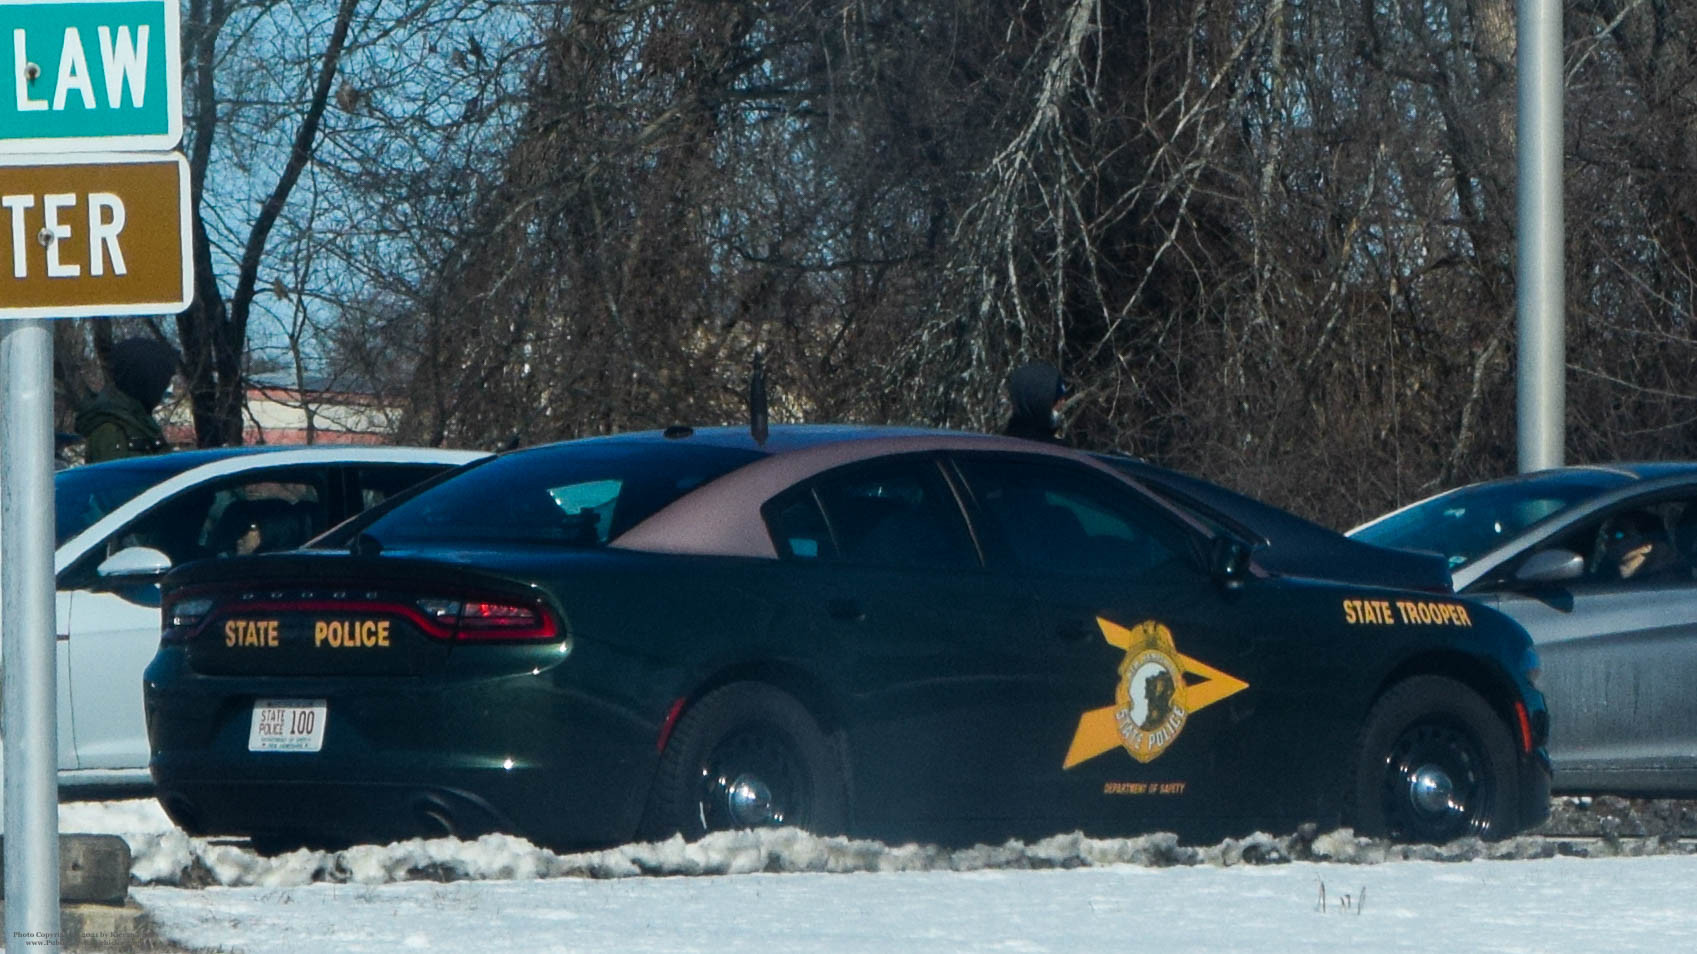 A photo  of New Hampshire State Police
            Cruiser 100, a 2017-2019 Dodge Charger             taken by Kieran Egan